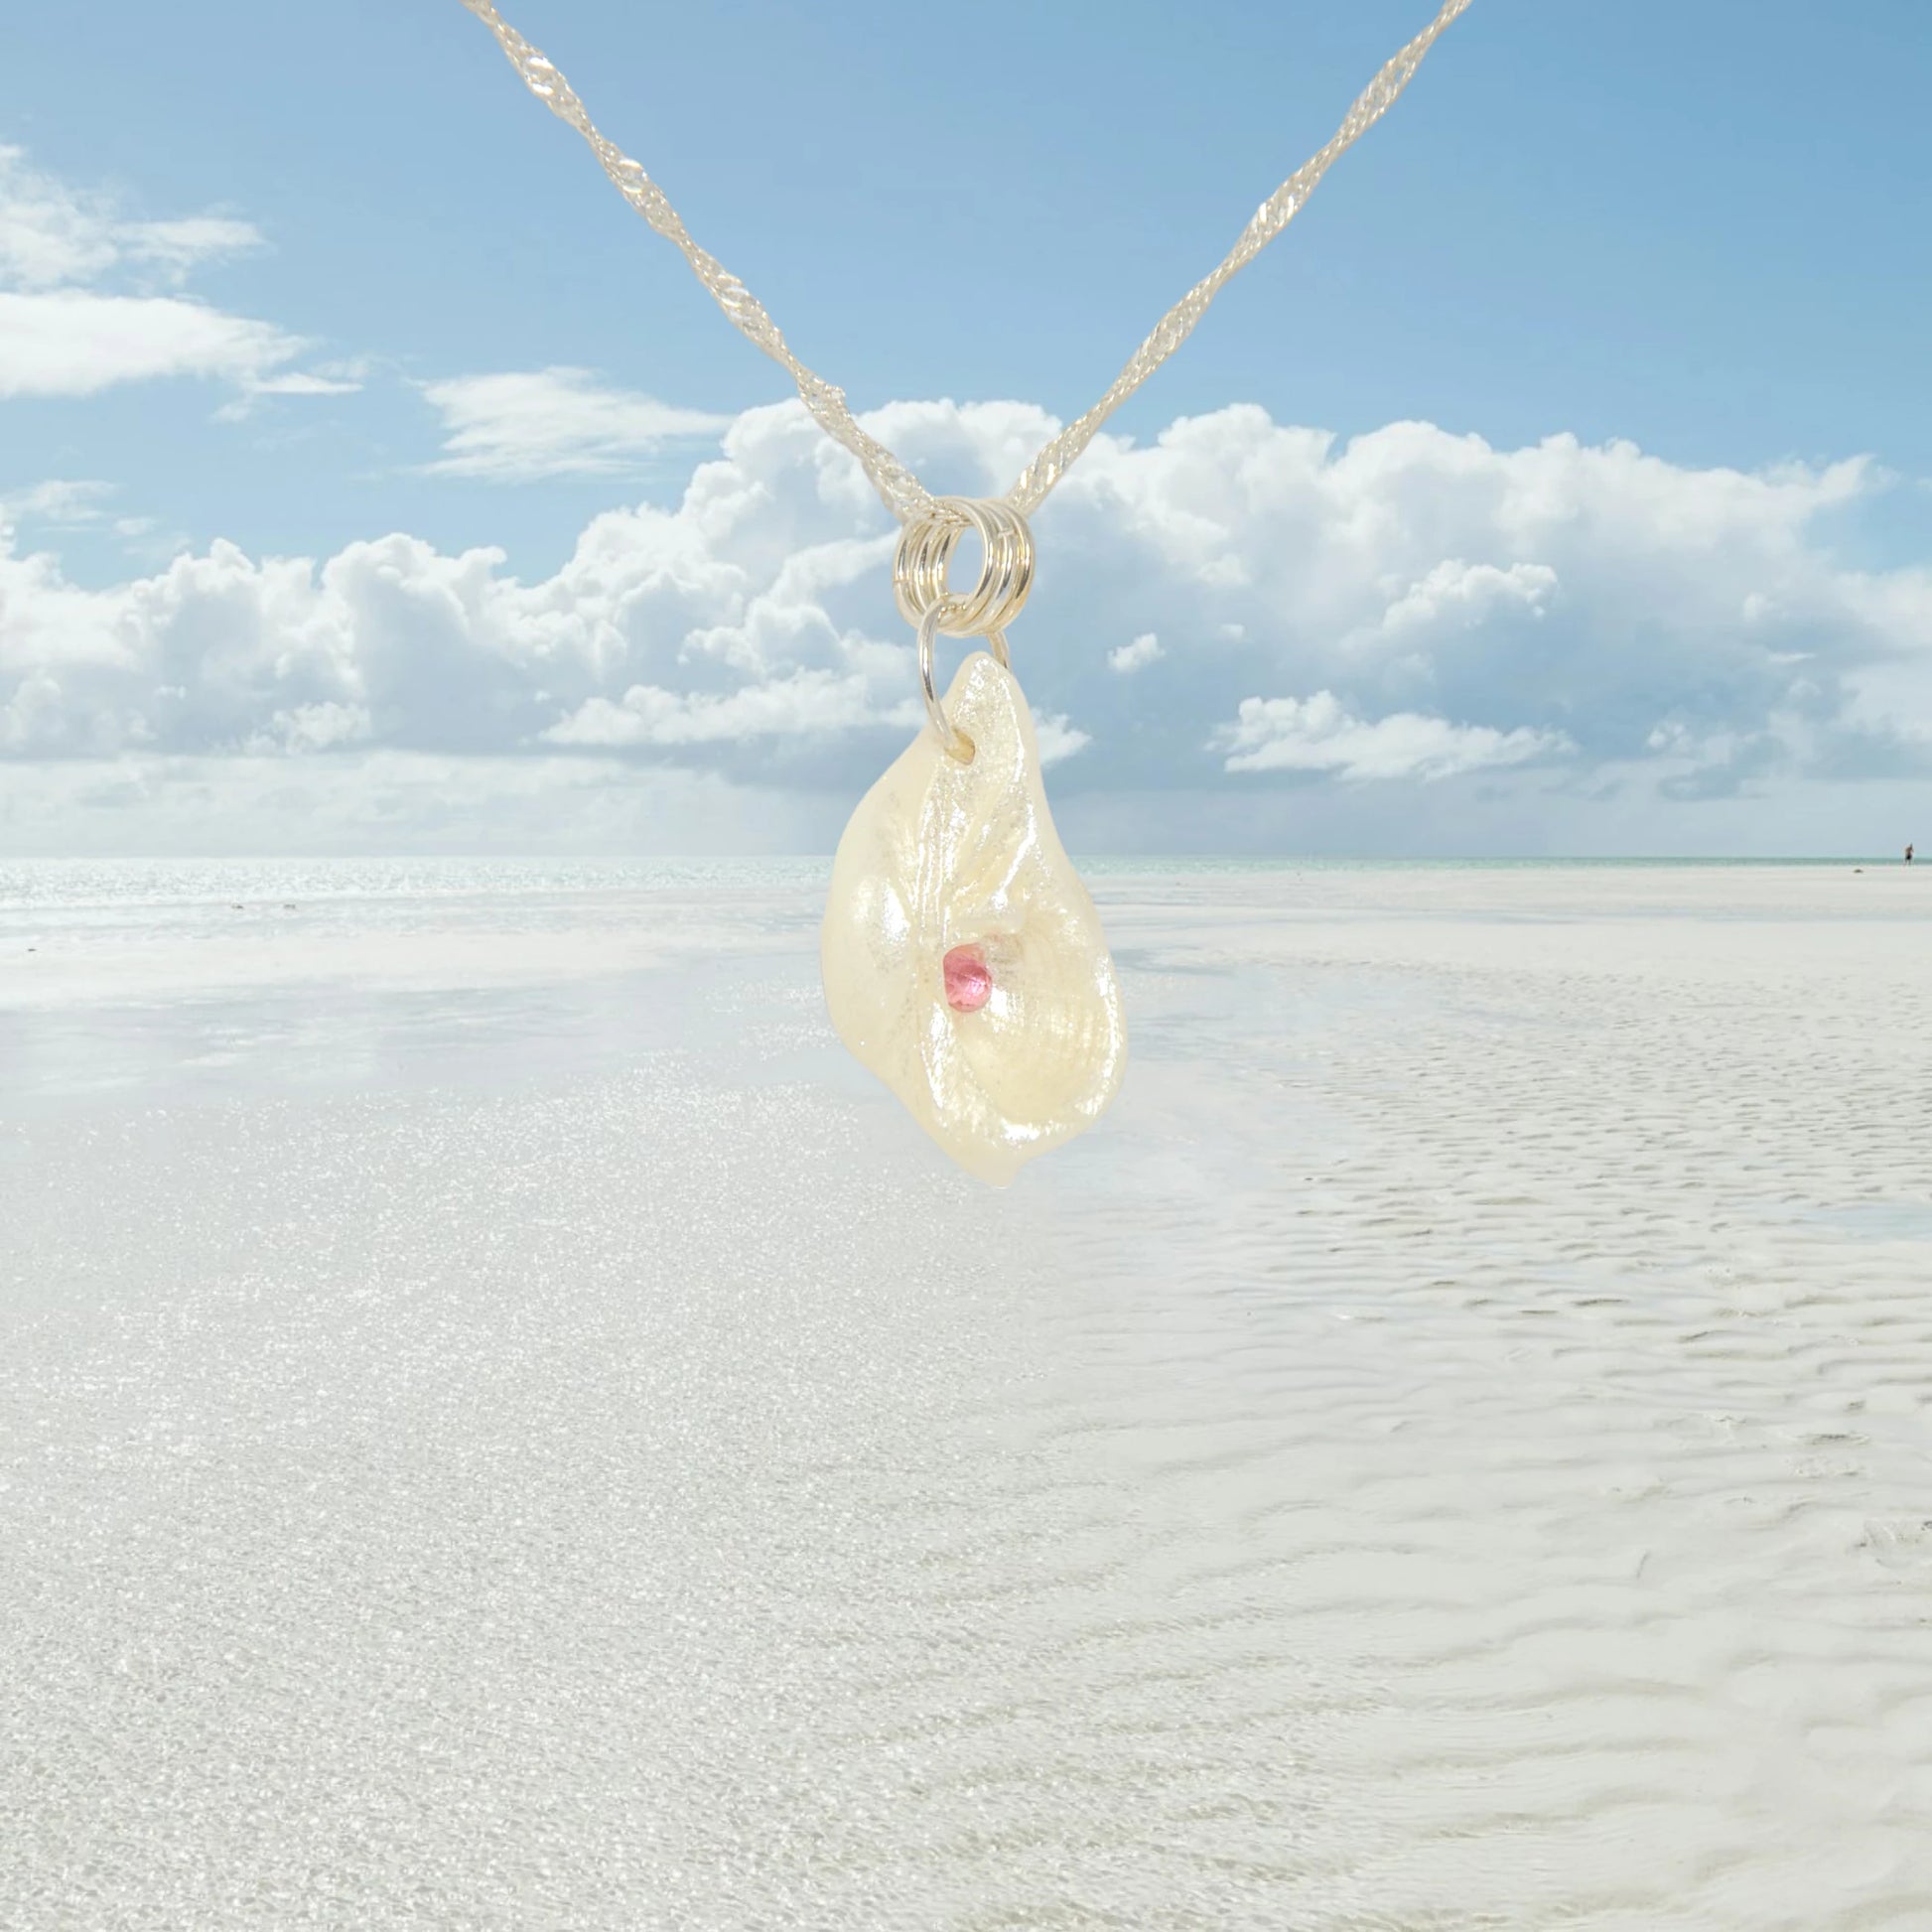 Jewel natural seashell with a real teardrop shaped rose cut pink tourmaline gemstone compliments the pendant. The background shows a ocean with clouds in the background.